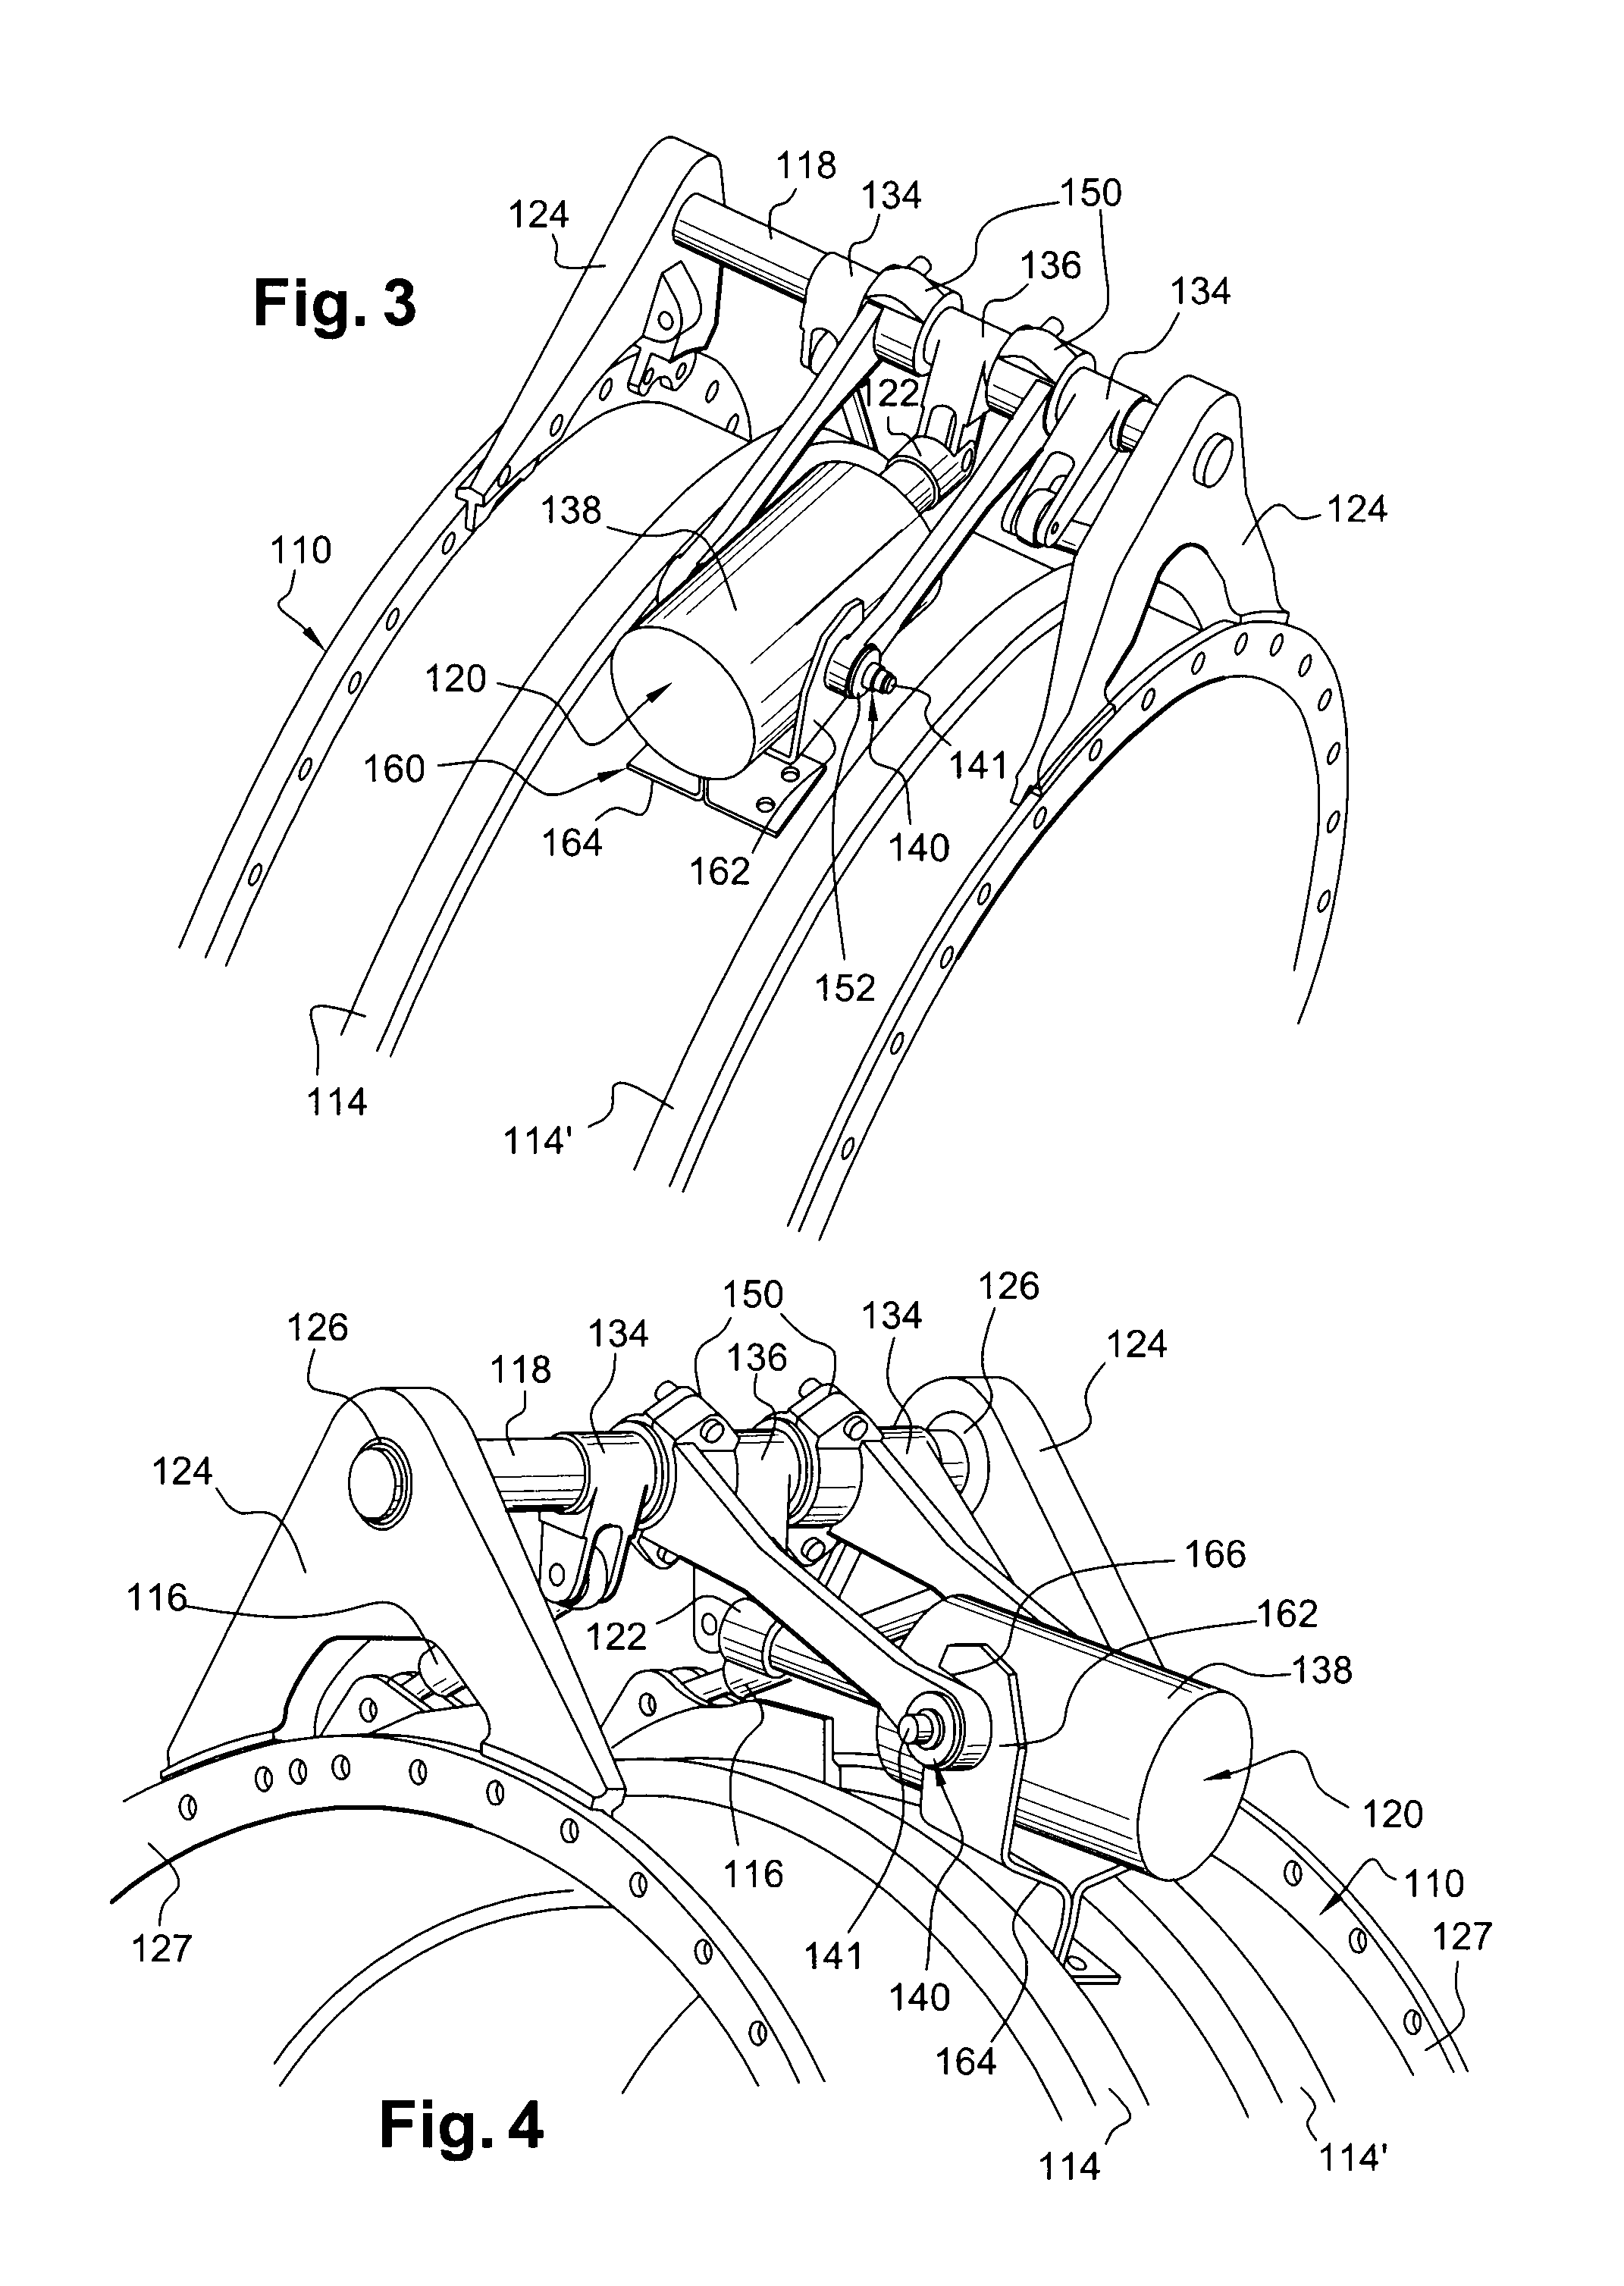 Device for controlling variable-pitch blades in a turbomachine compressor